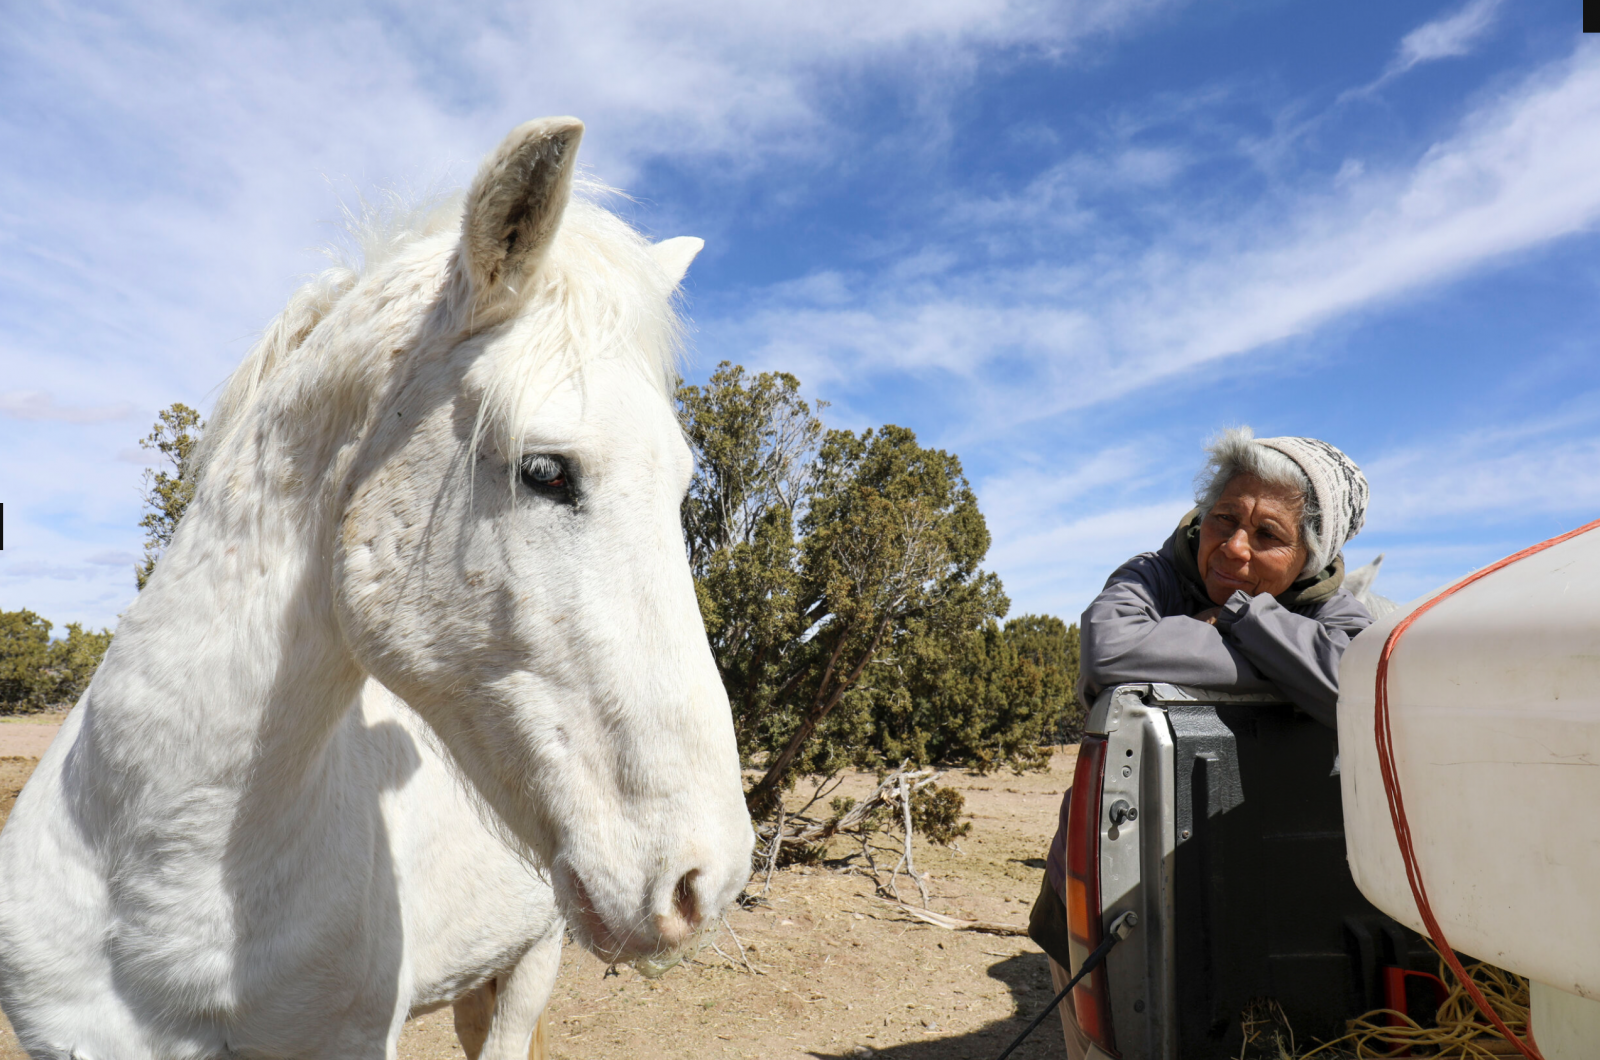 Meet the women reining in hope for New Mexico's wild horses